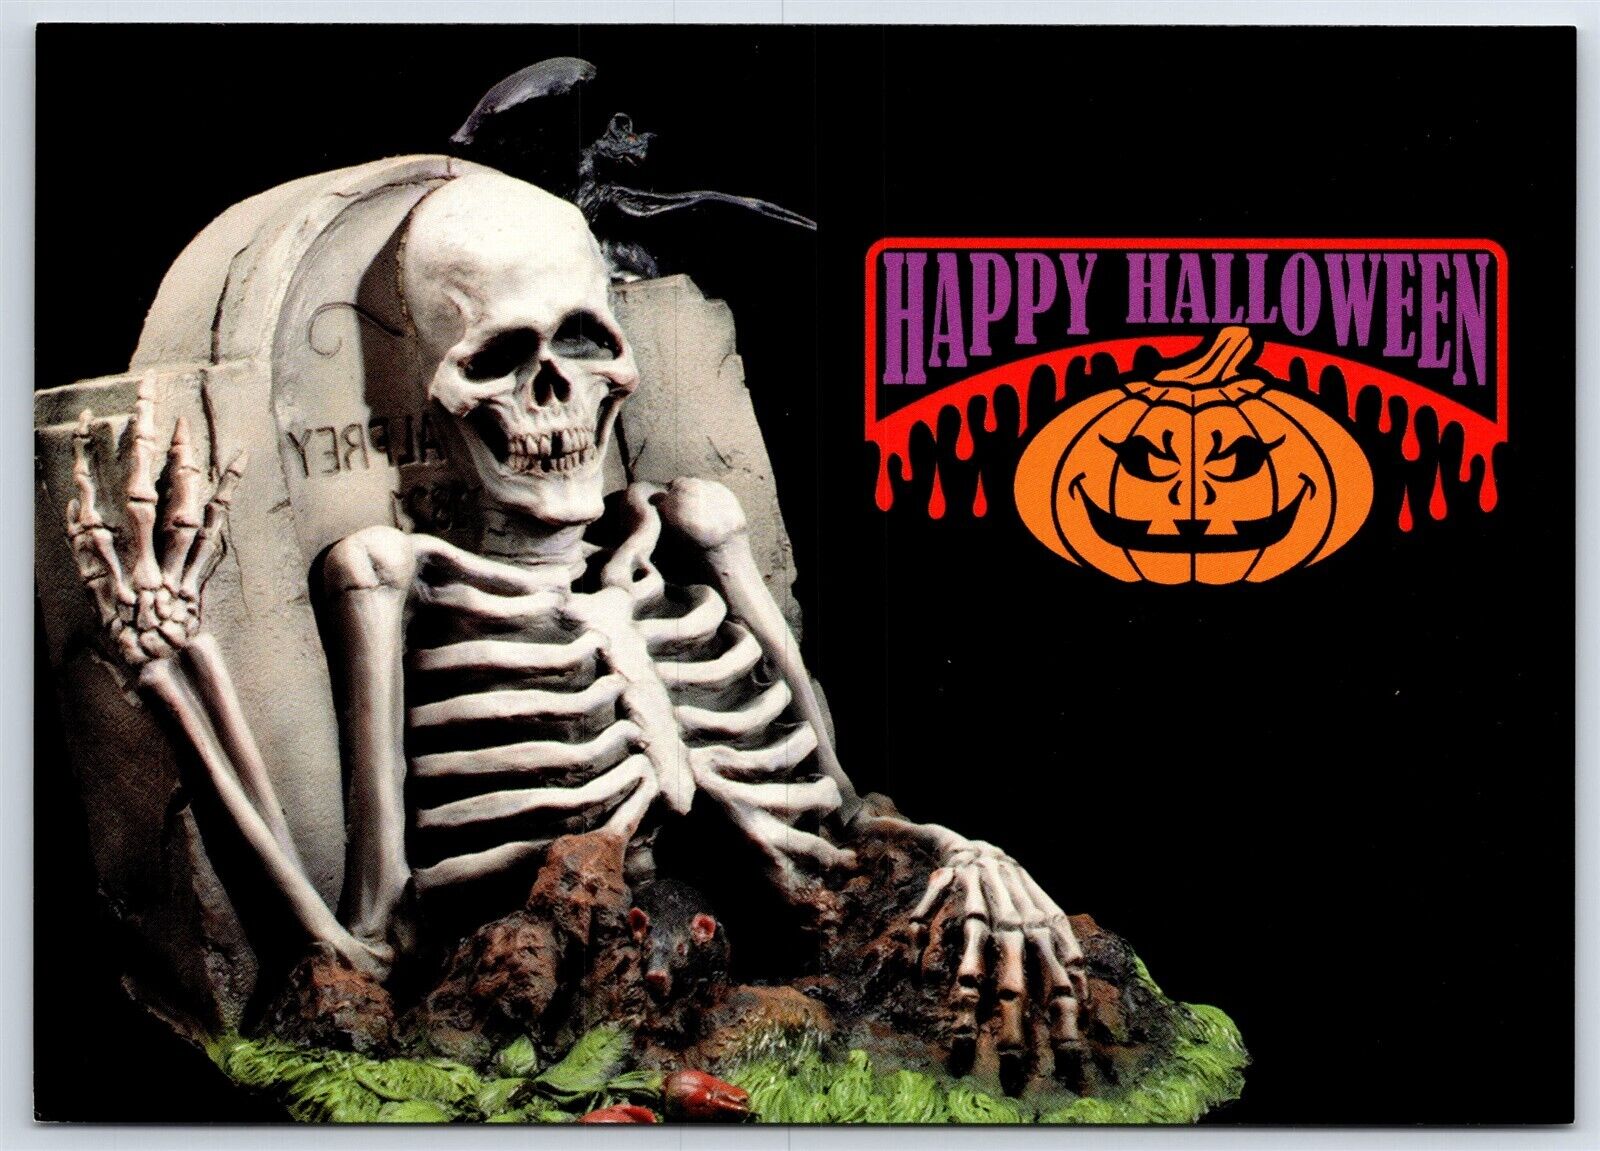 Happy Halloween Ad Postcard Halloween Outlet Skeleton Escaping Grave c2000 Z16